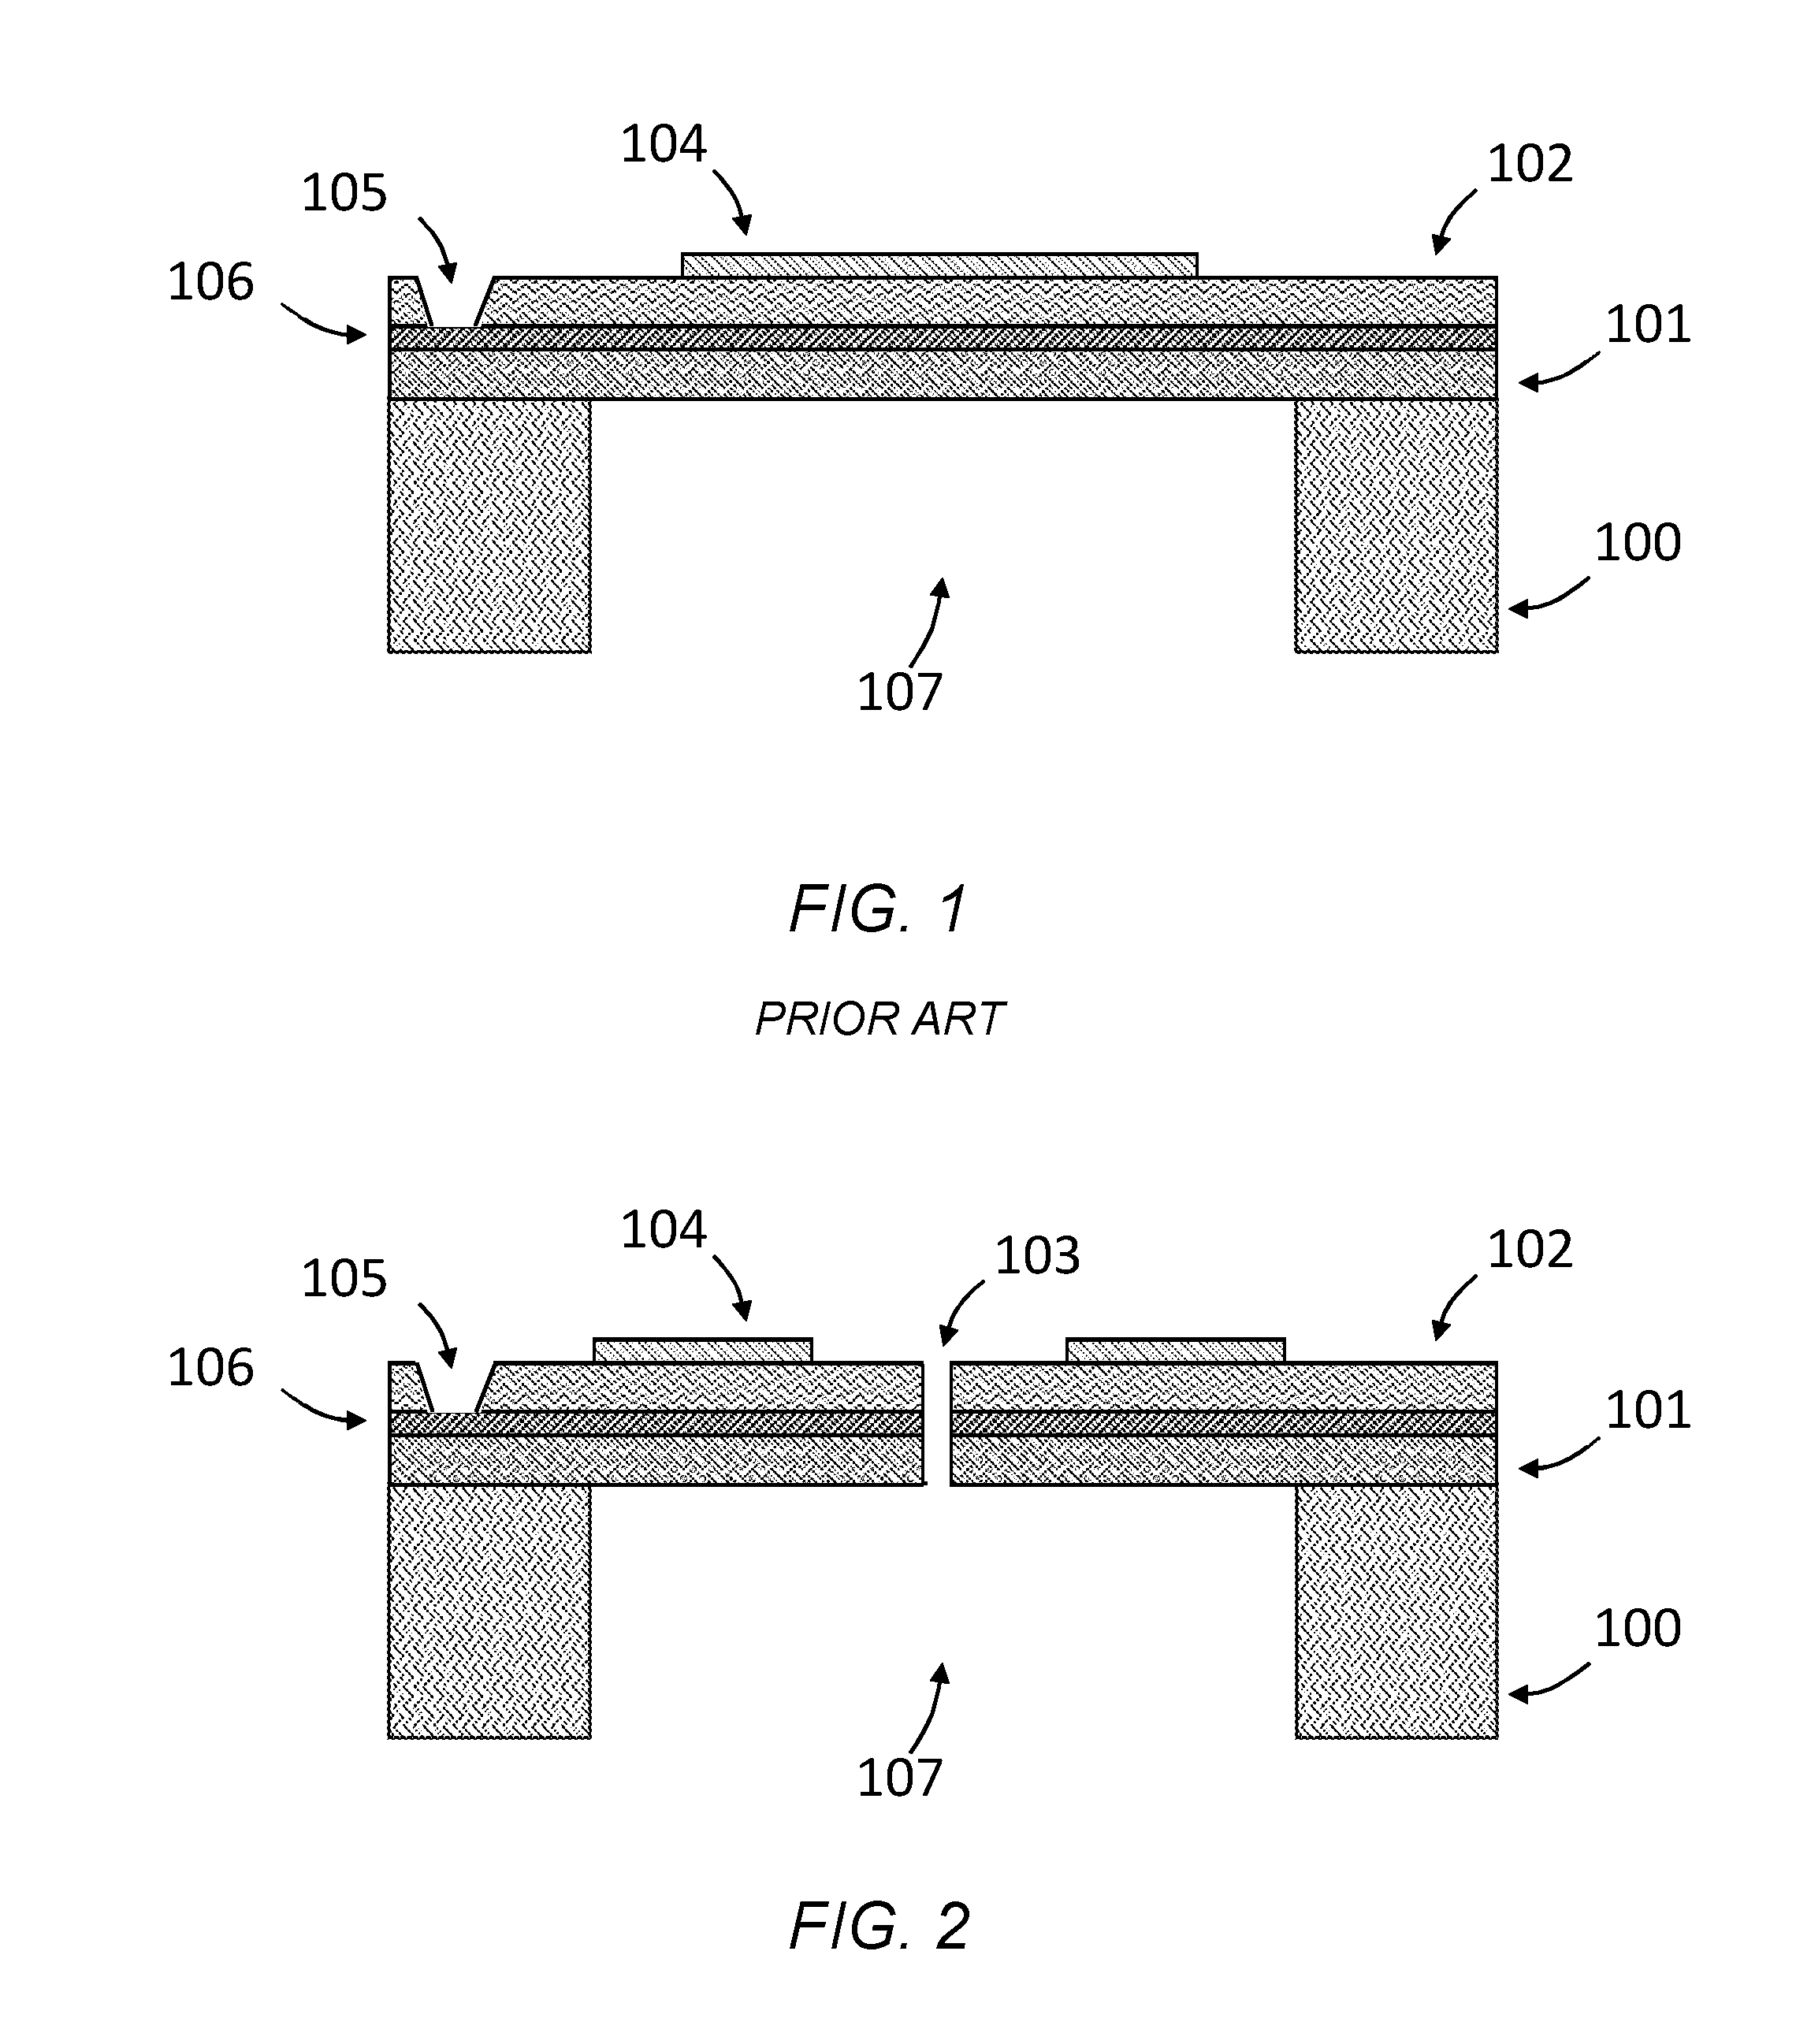 Micromachined ultrasonic transducers with a slotted membrane structure